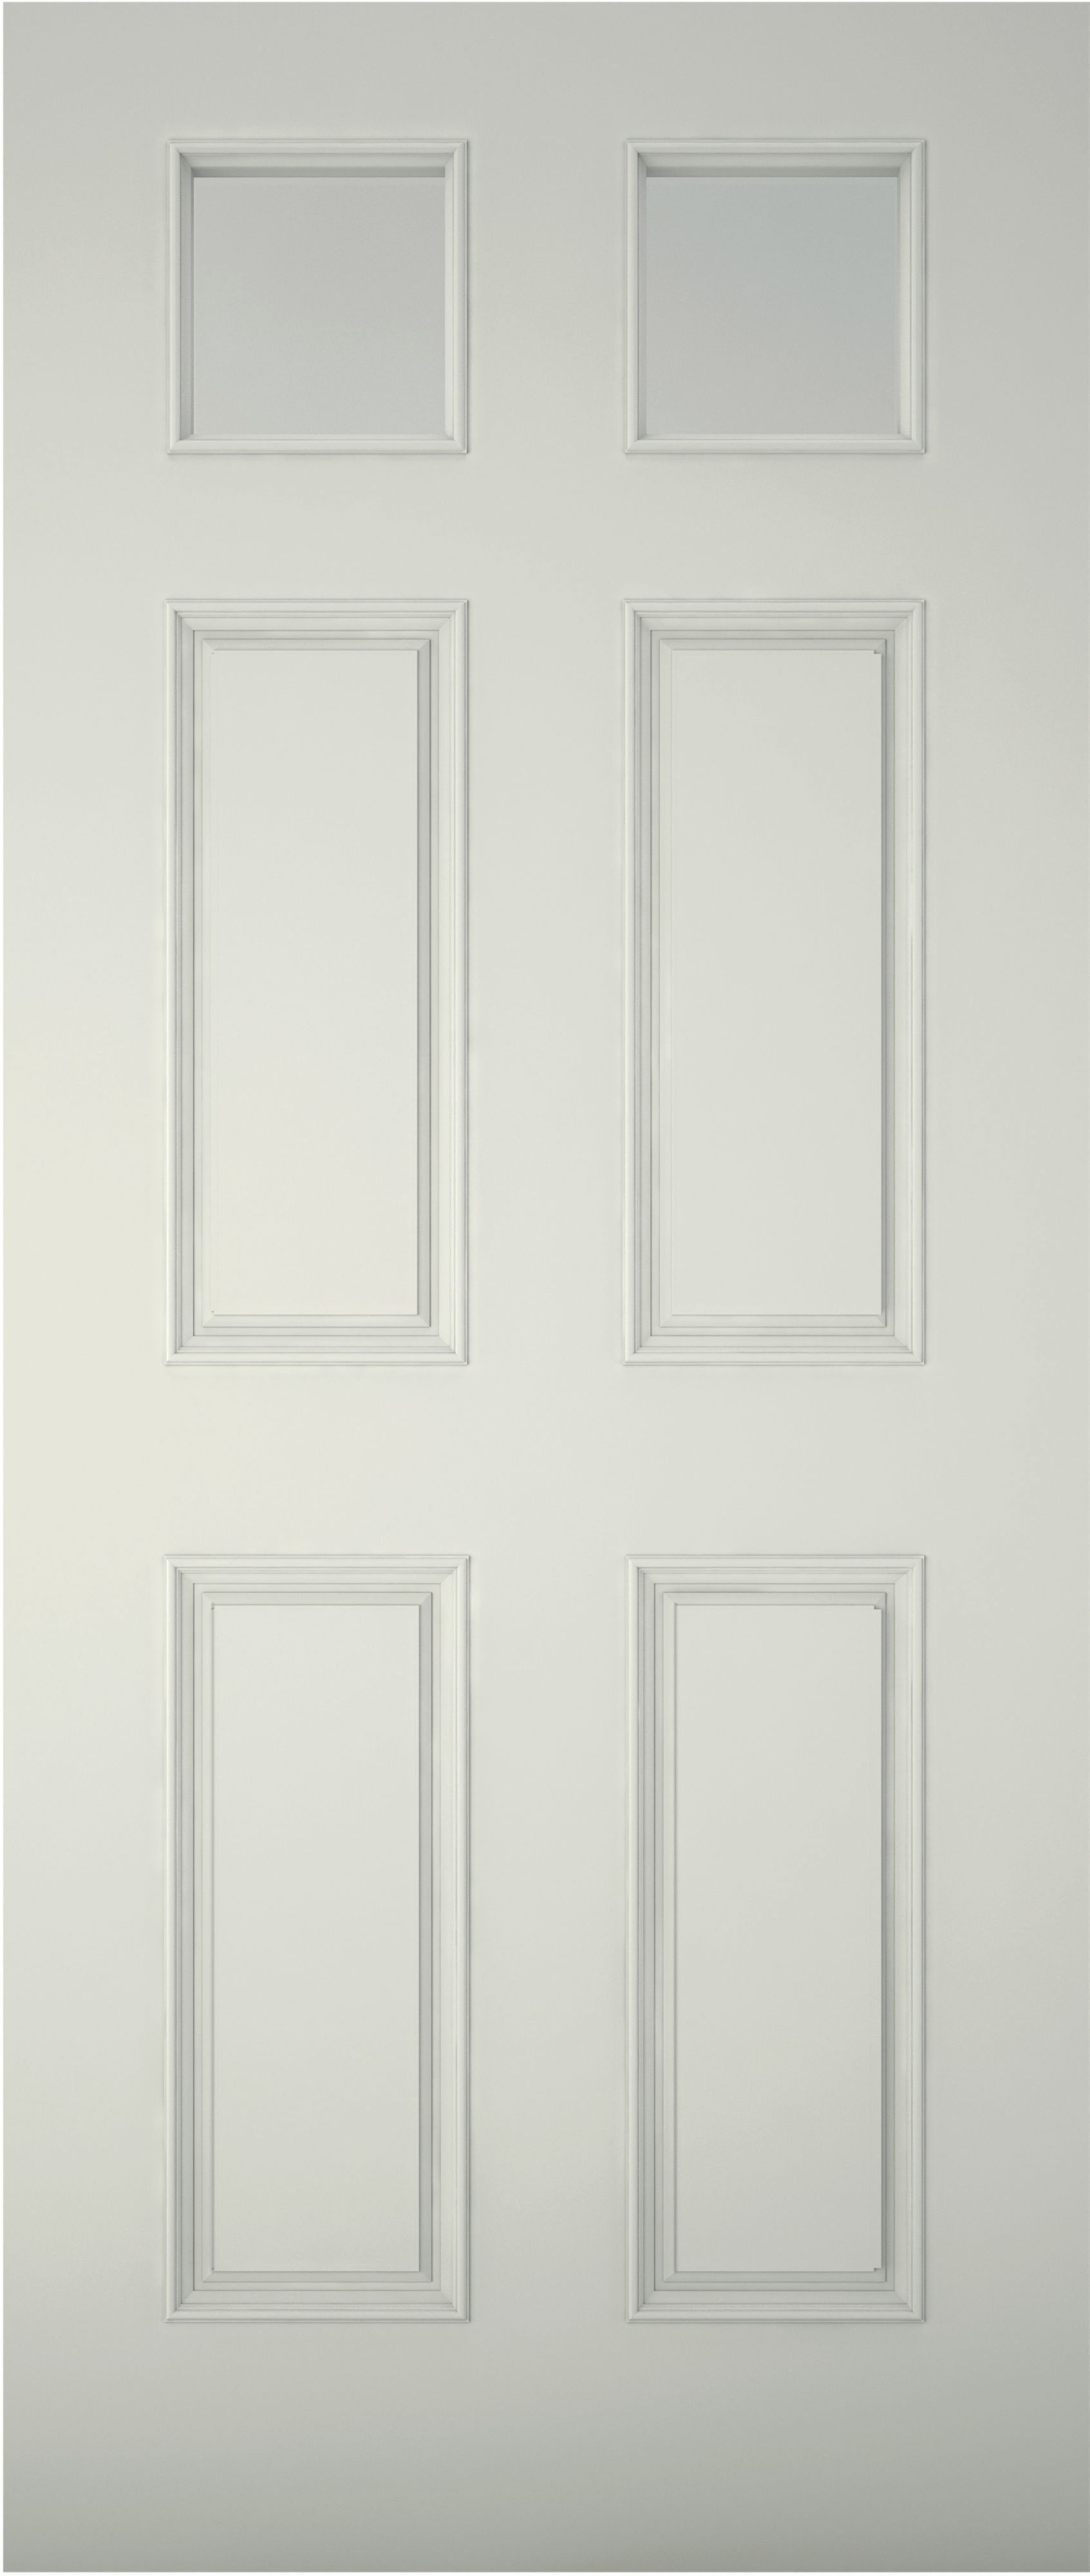 6 panel Frosted Glazed White LH & RH External Front Door set & letter plate, (H)2125mm (W)907mm